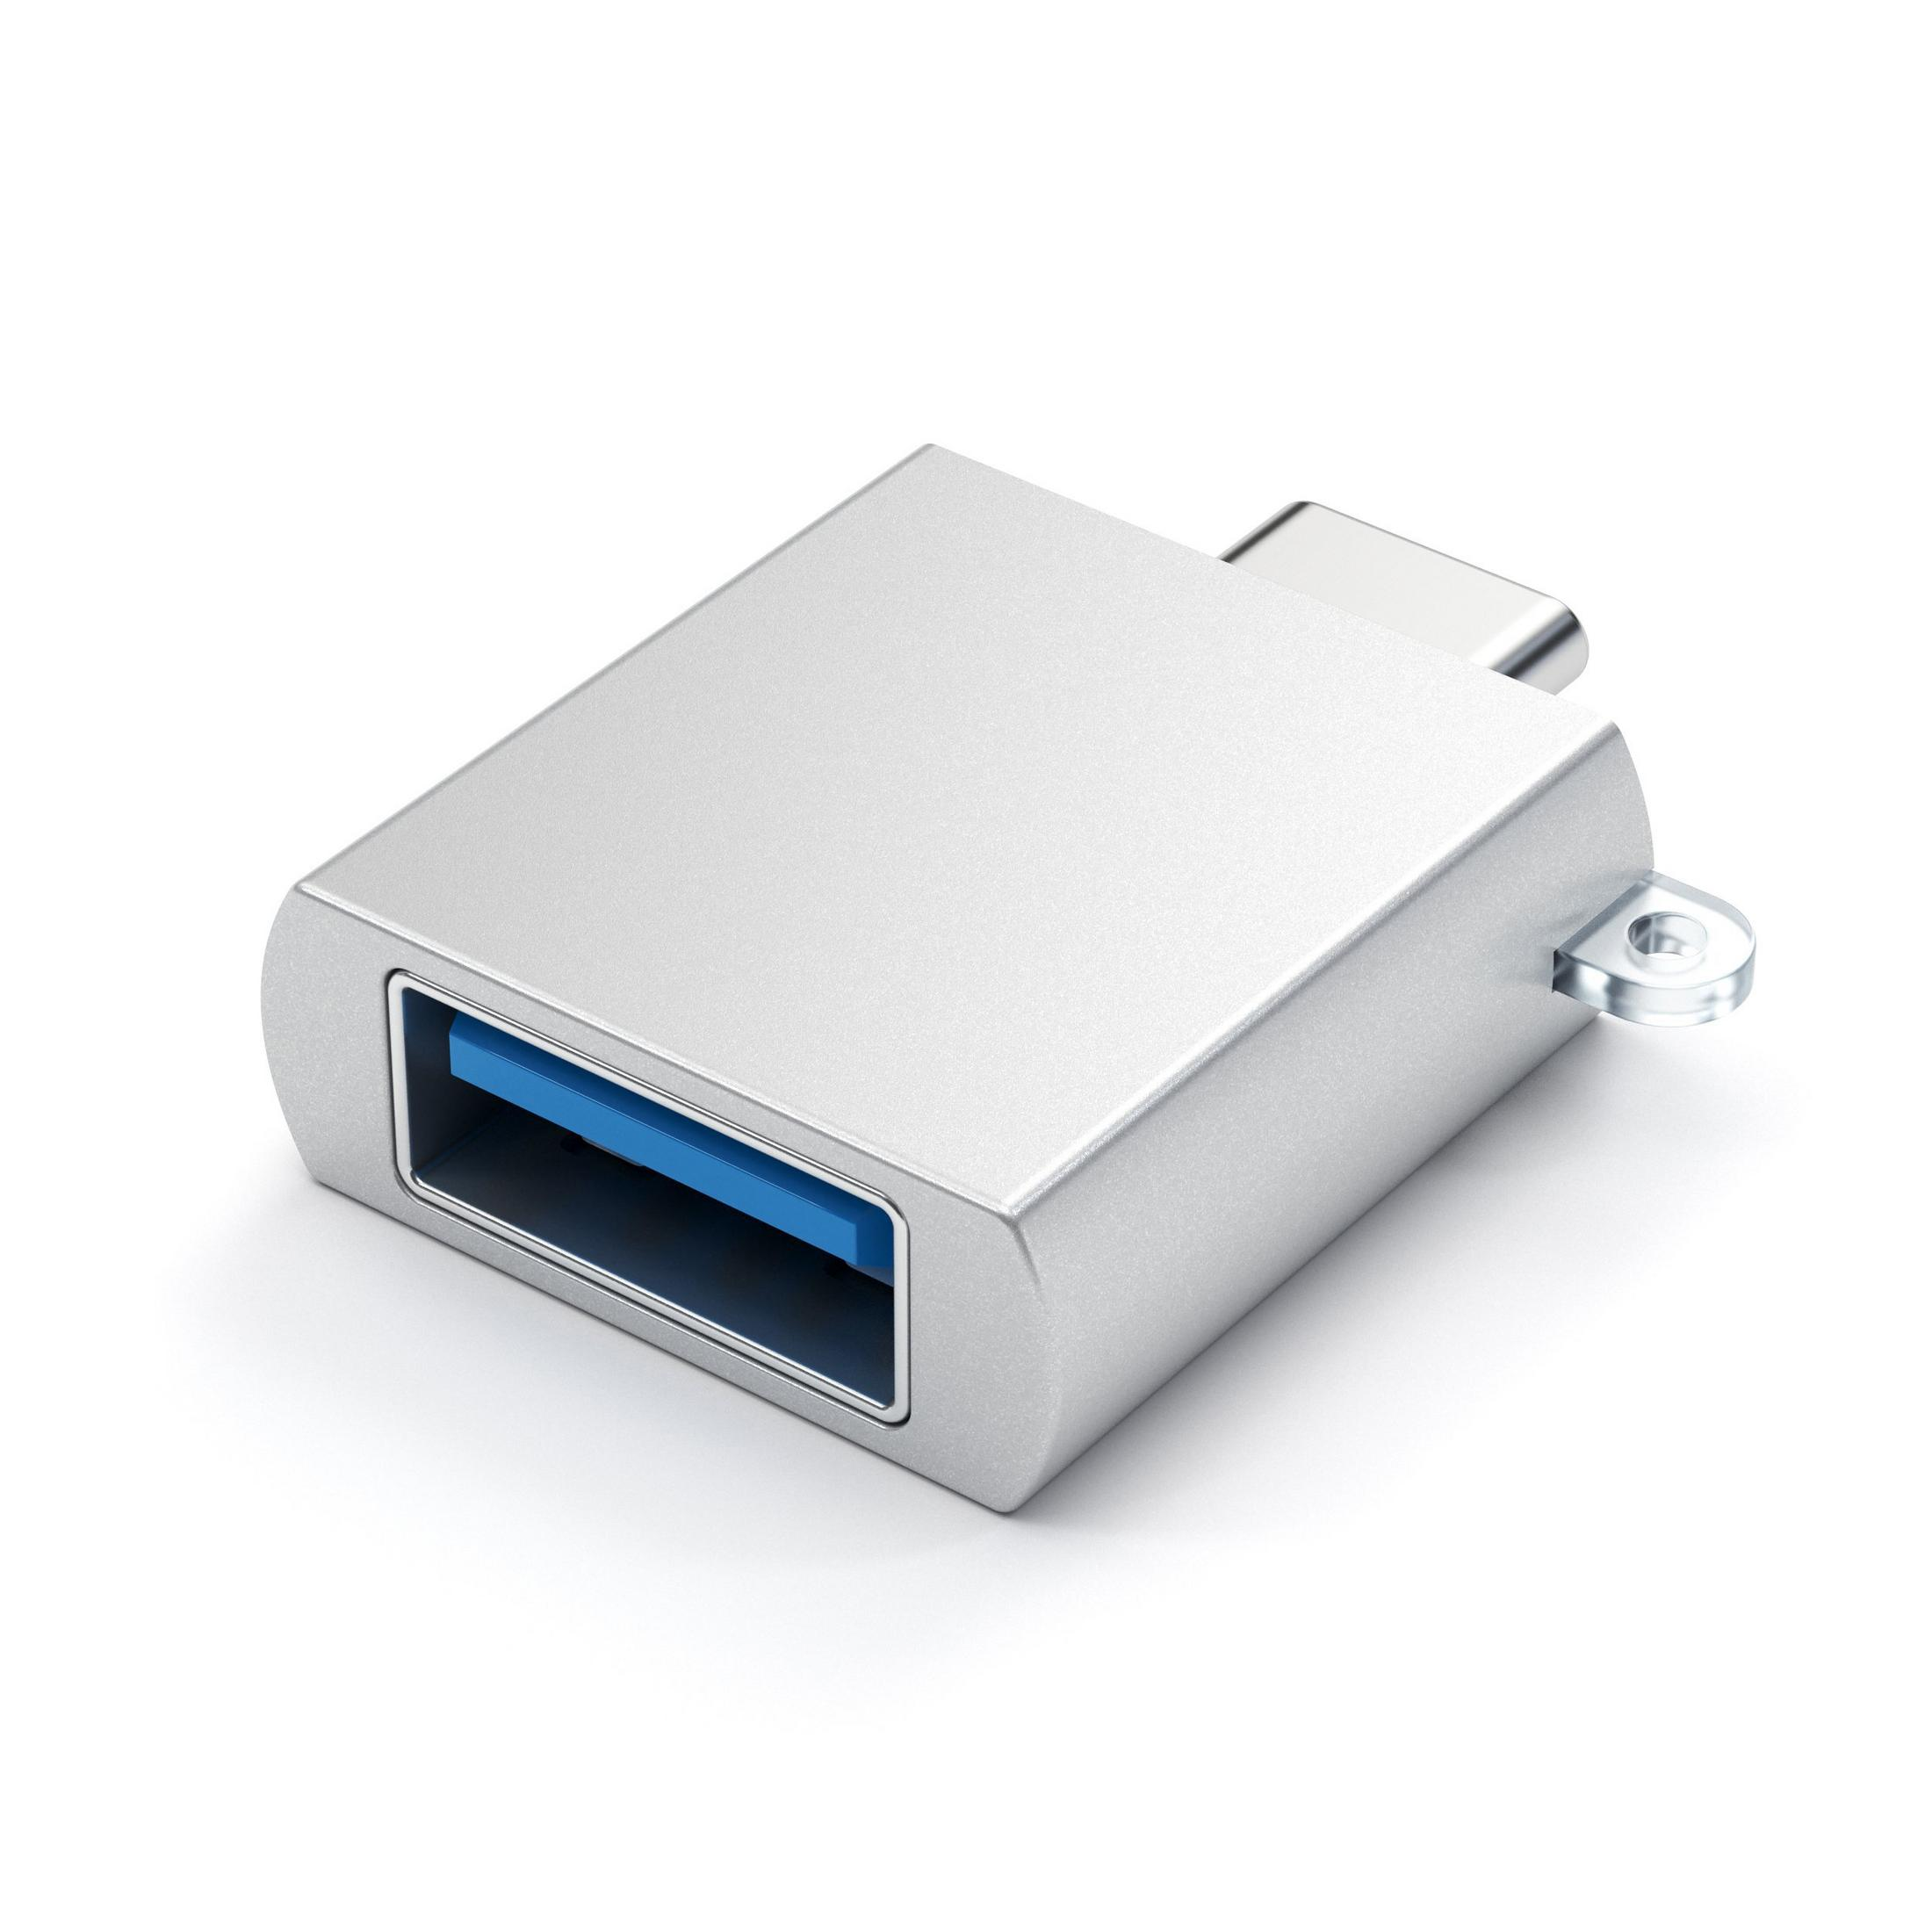 SATECHI SILBER Adapter, 179965 TYPE-C ADAPTER Silber USB